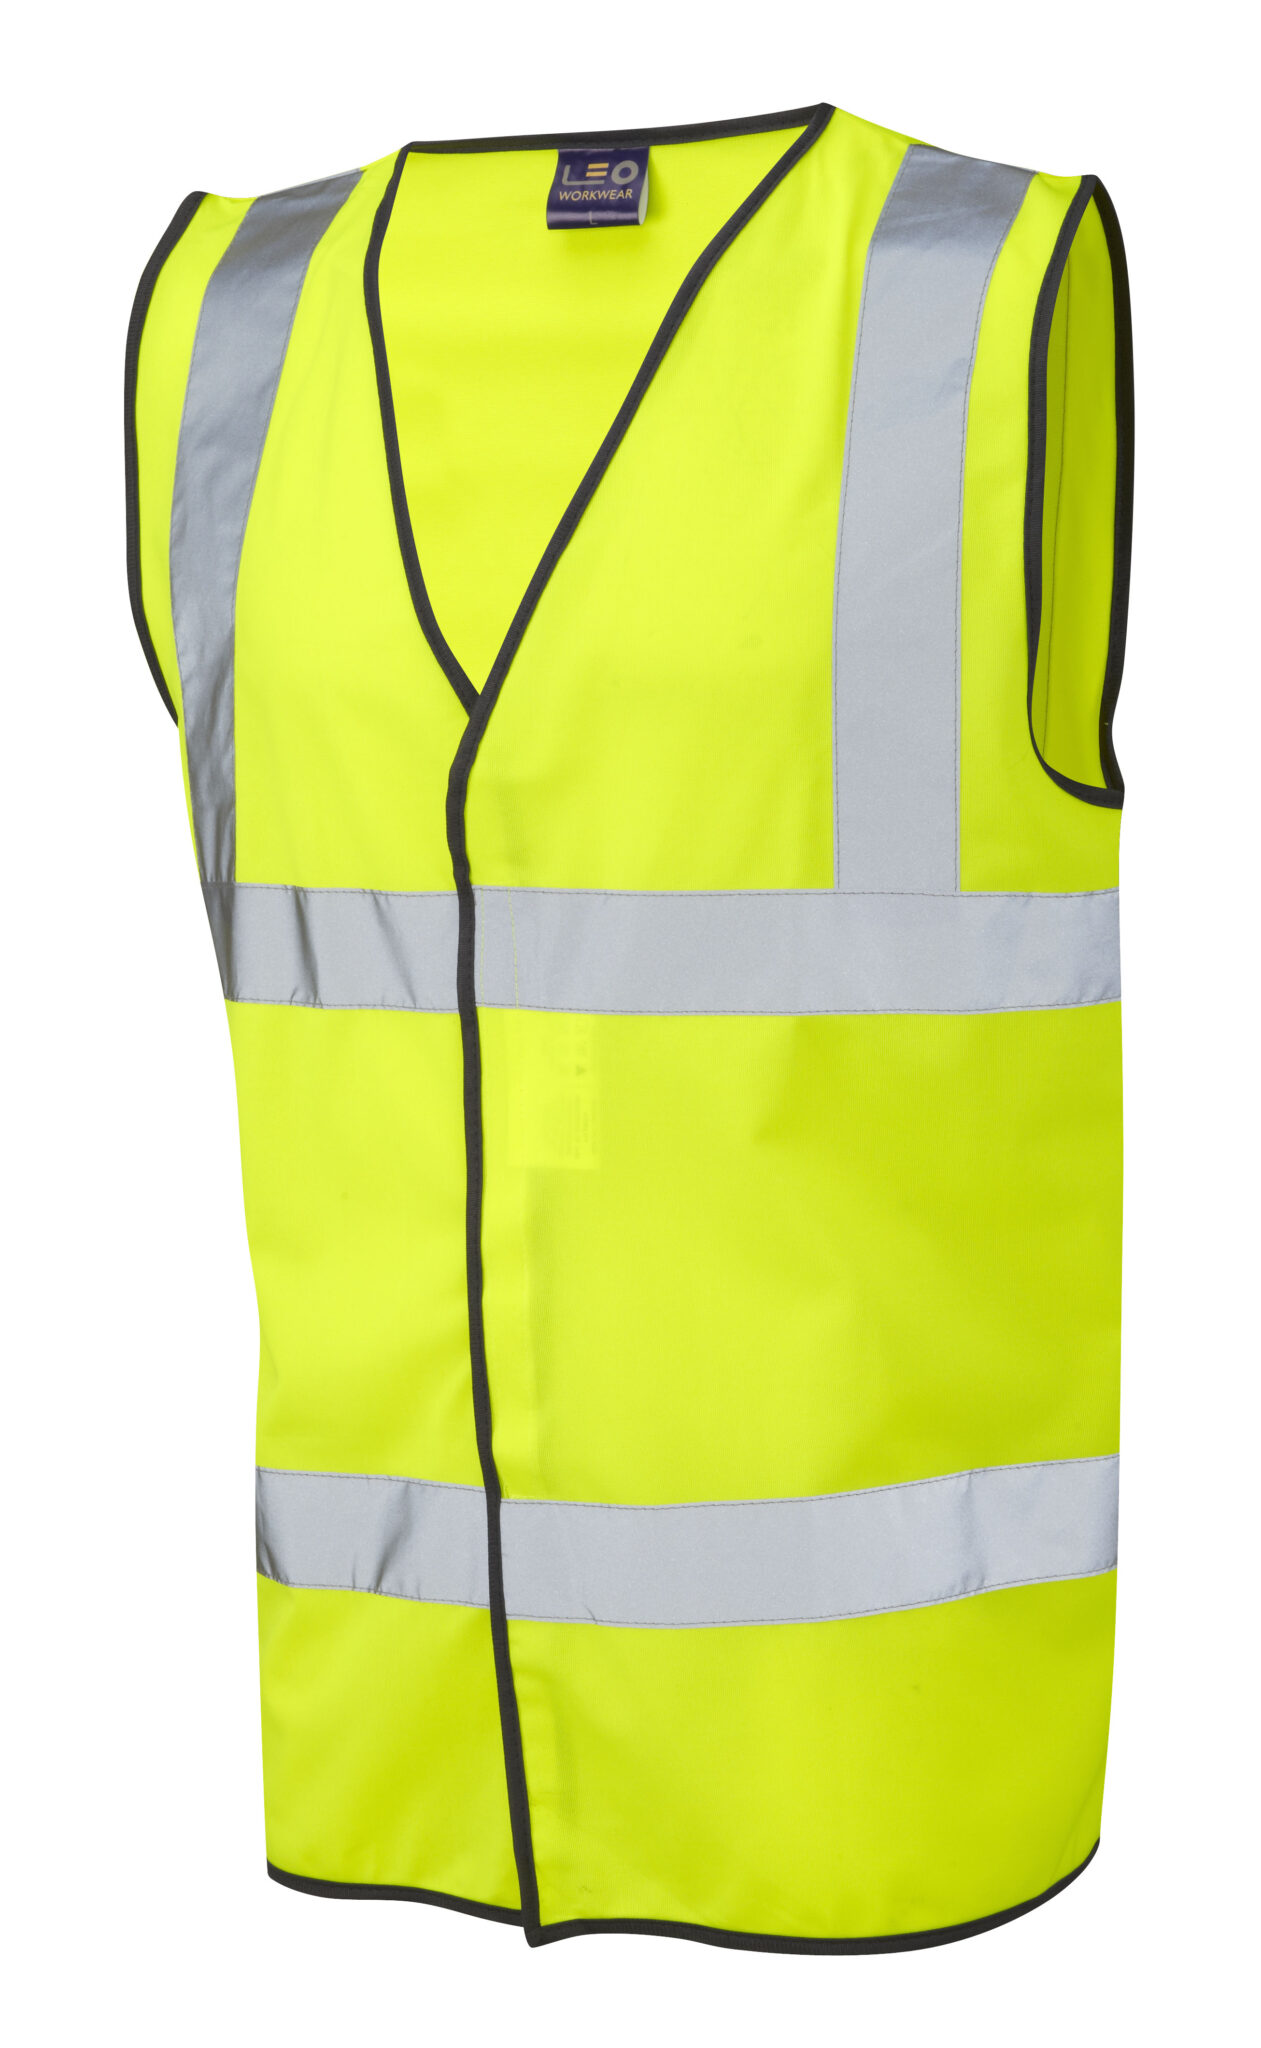 Worker Safety Vest Security Reflective Visibility Protective Warehouse Wear  Business & Industrie LA2642001